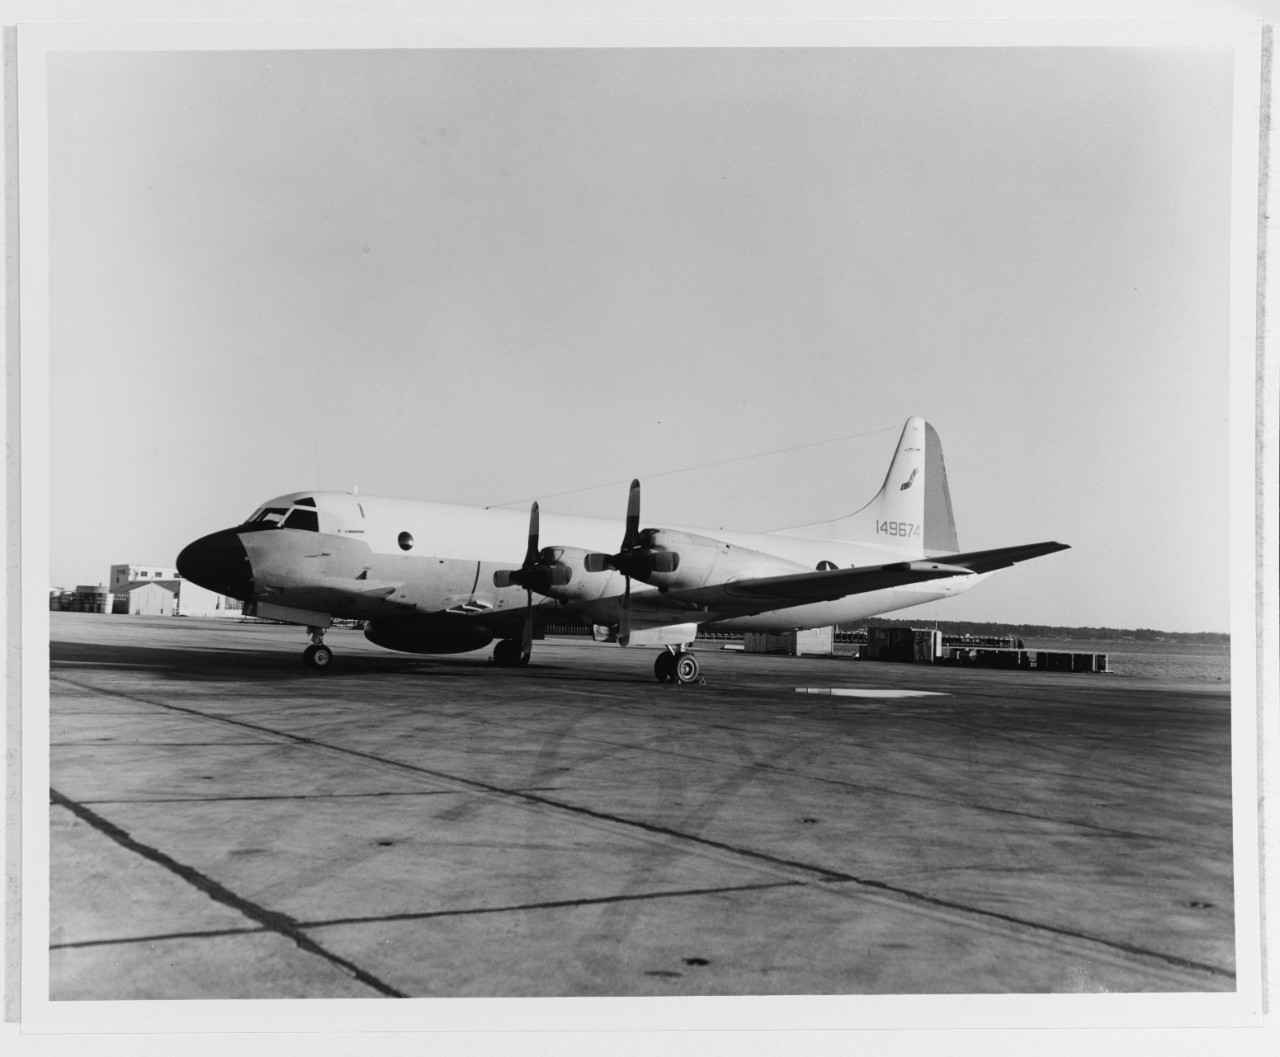 WP-3A Orion